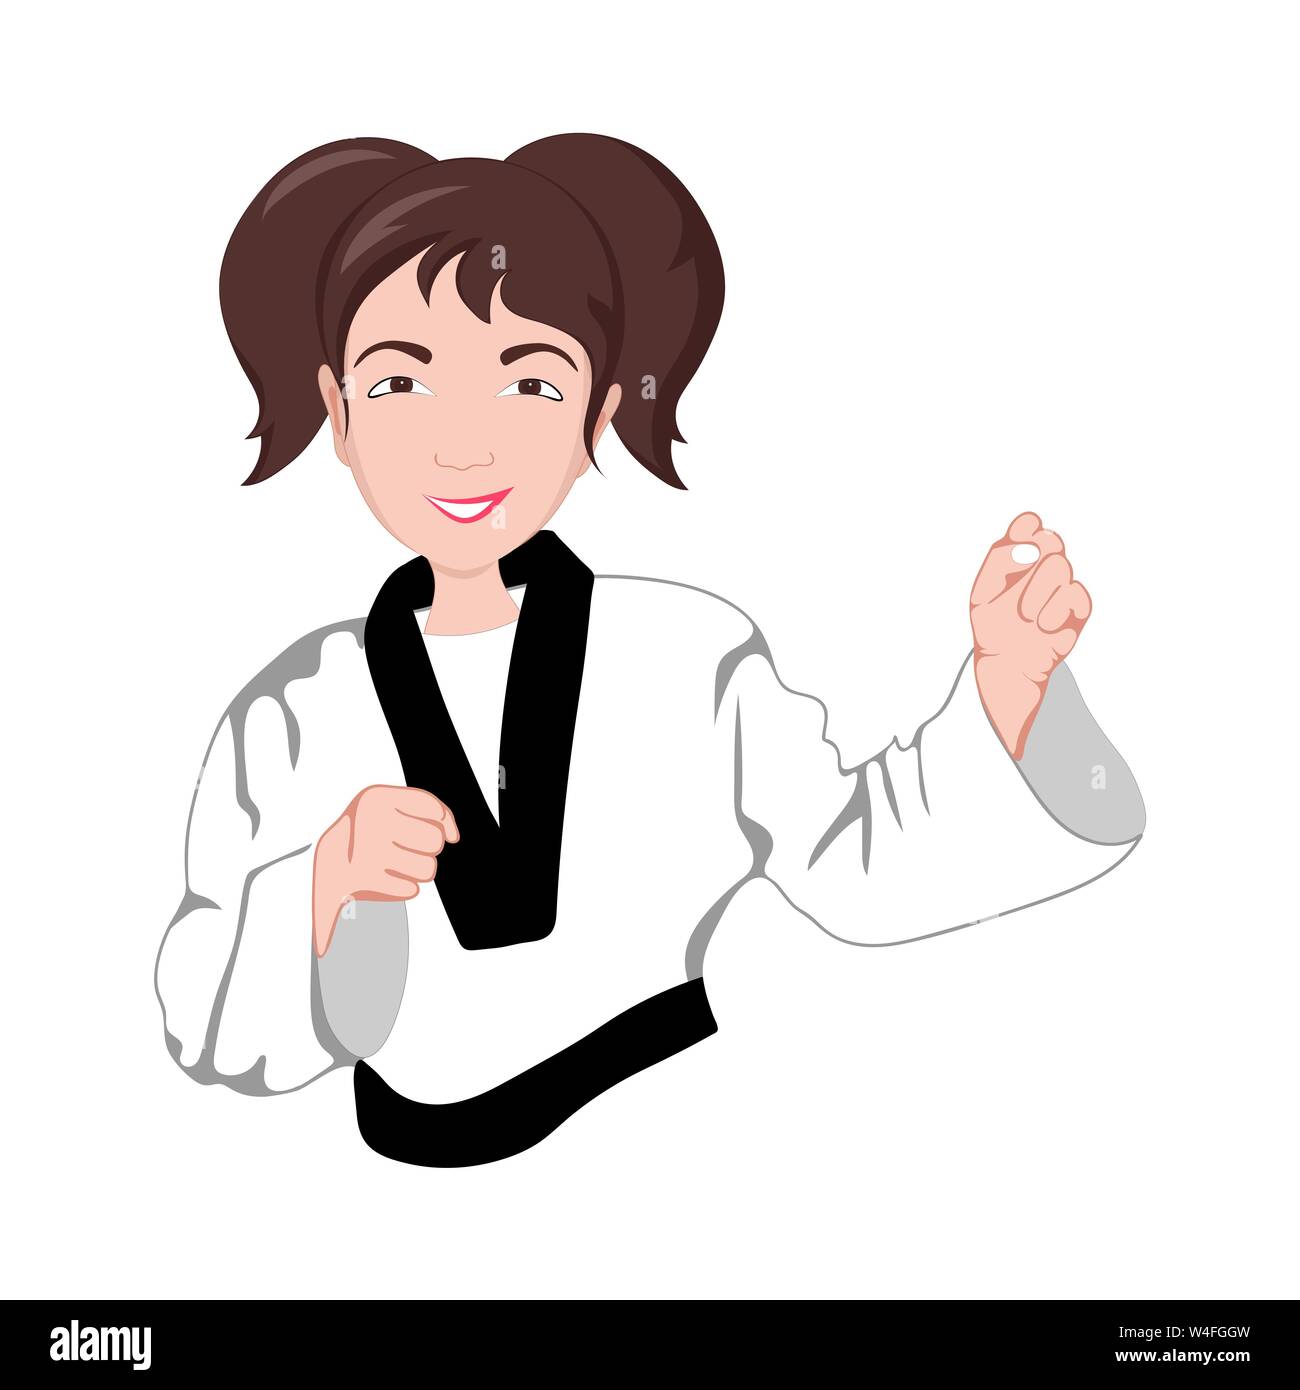 Asian karate girl with two tails stands in the fighting stance, funny vector isolated illustration. Stock Vector